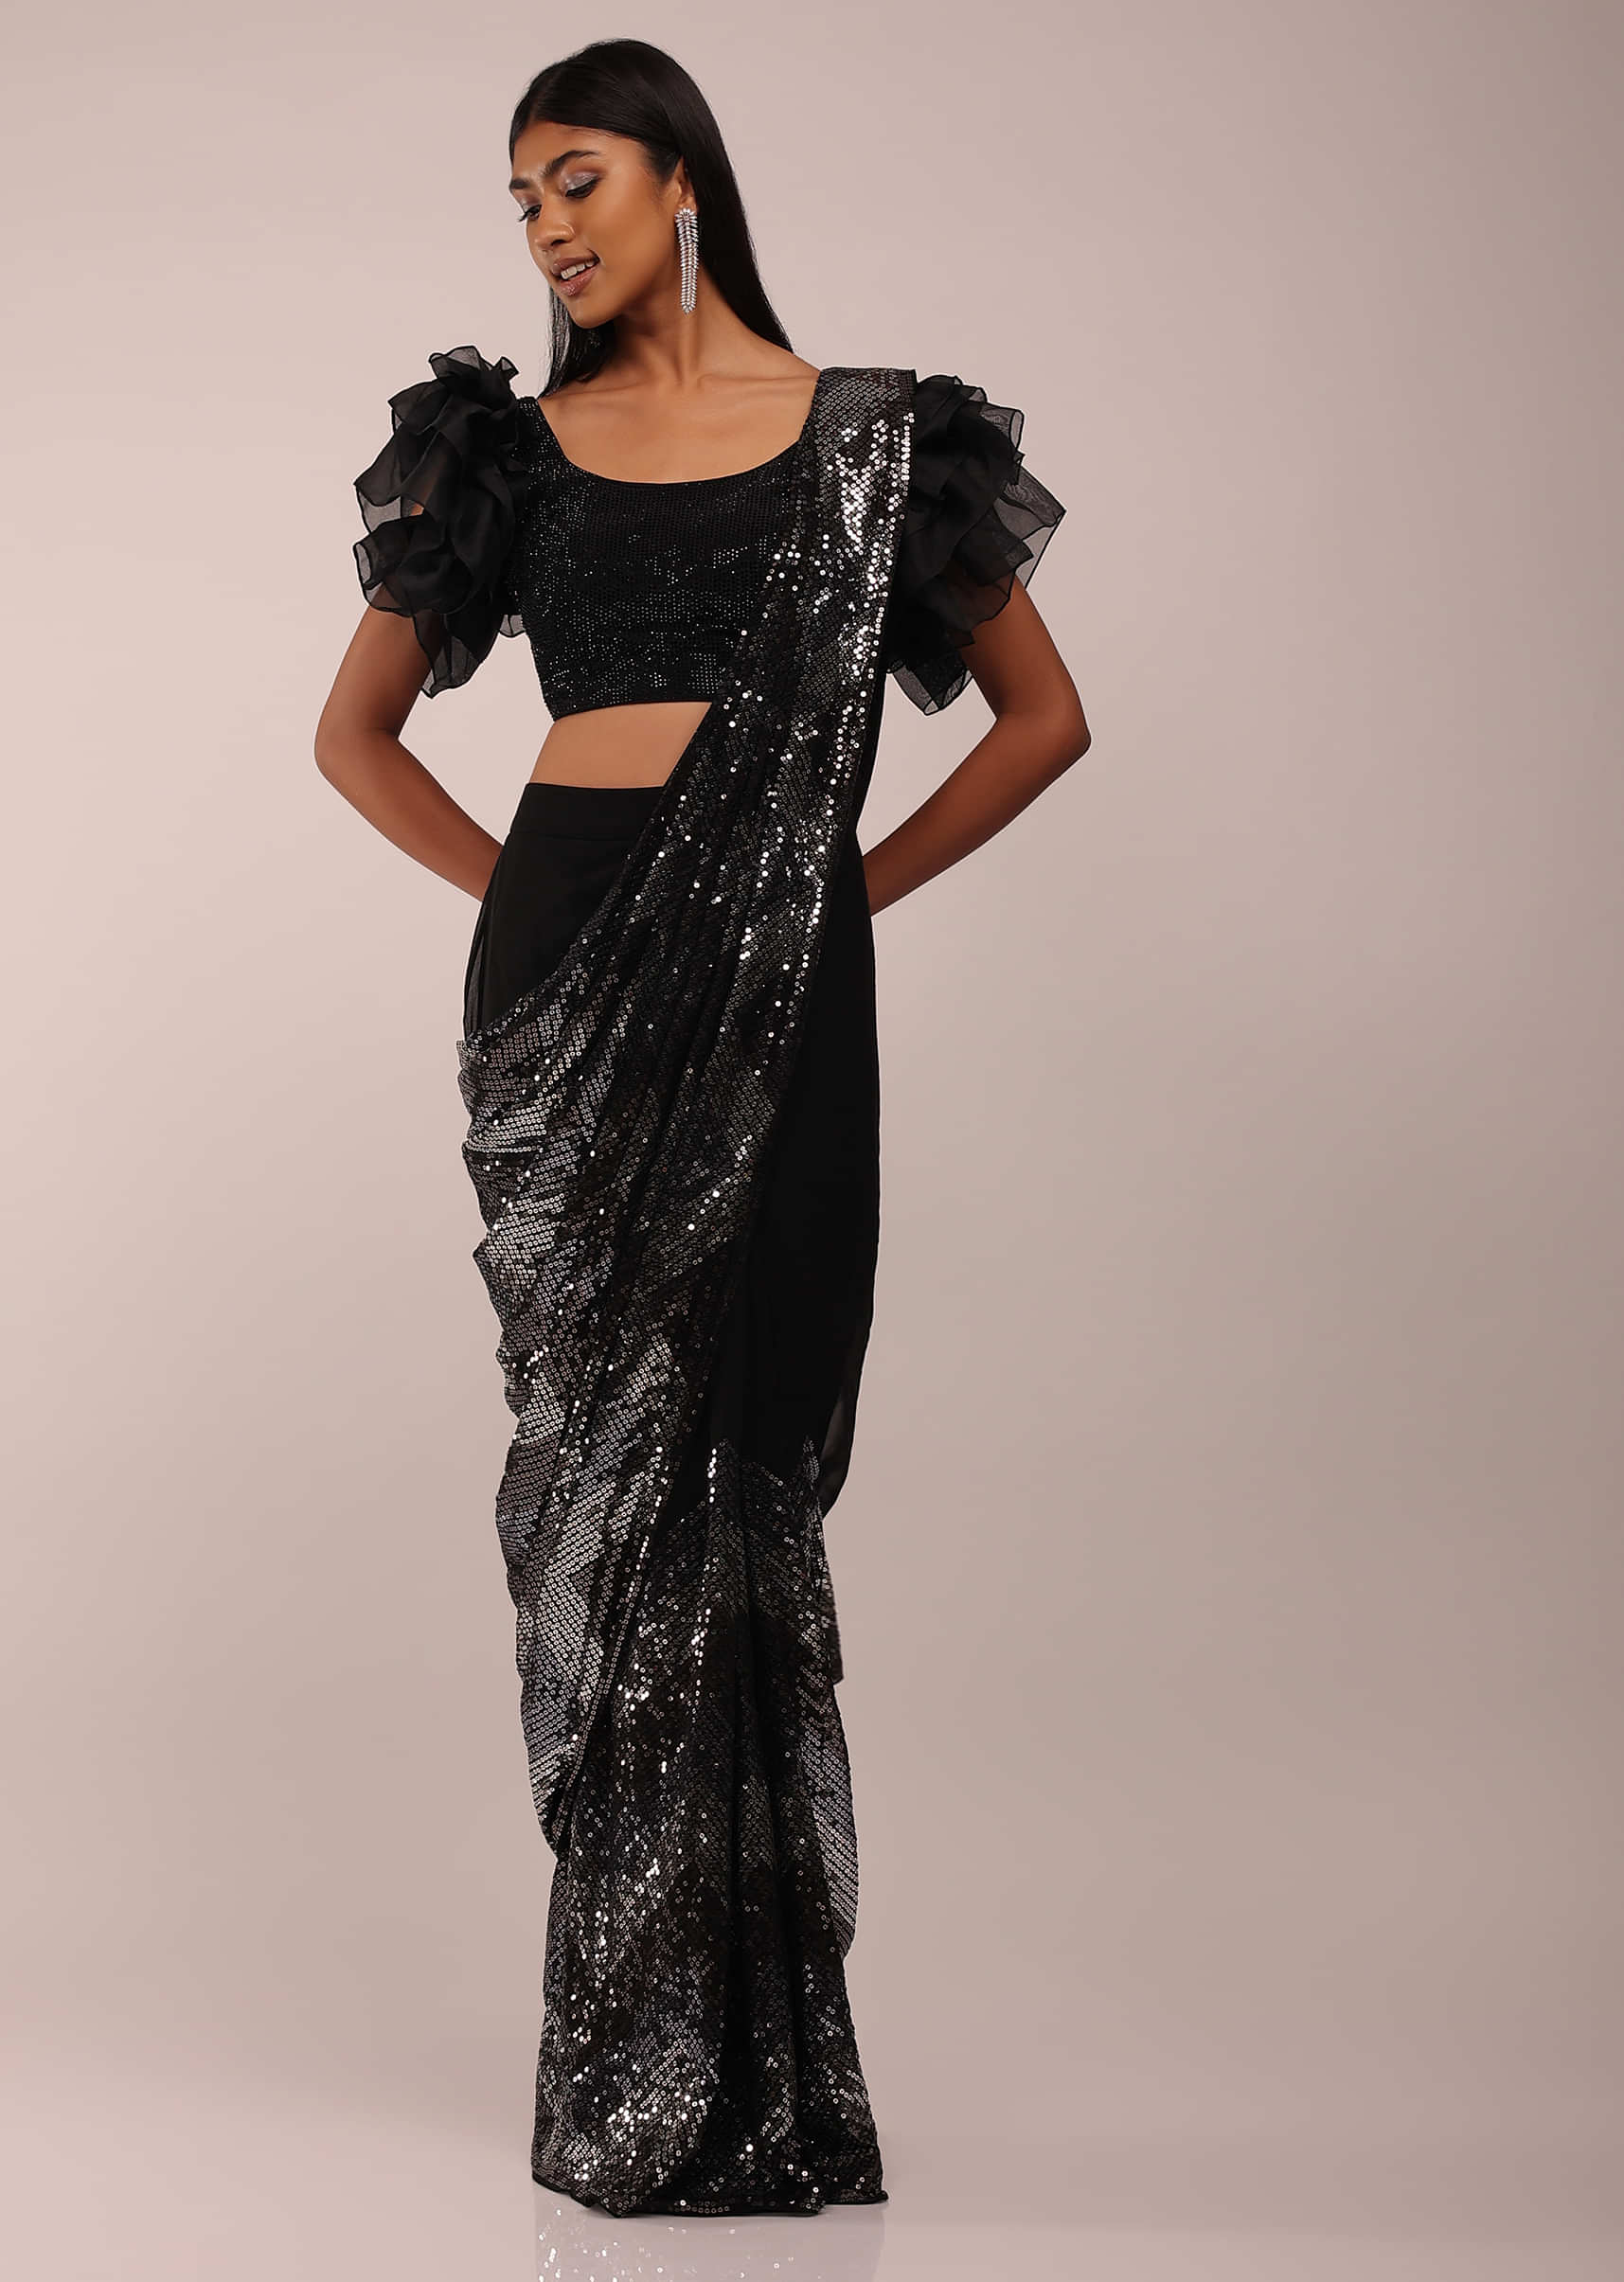 Noir Black Ready Pleated Saree With A Ruffled Sleeves Blouse In Stones And Sequins Embroidery